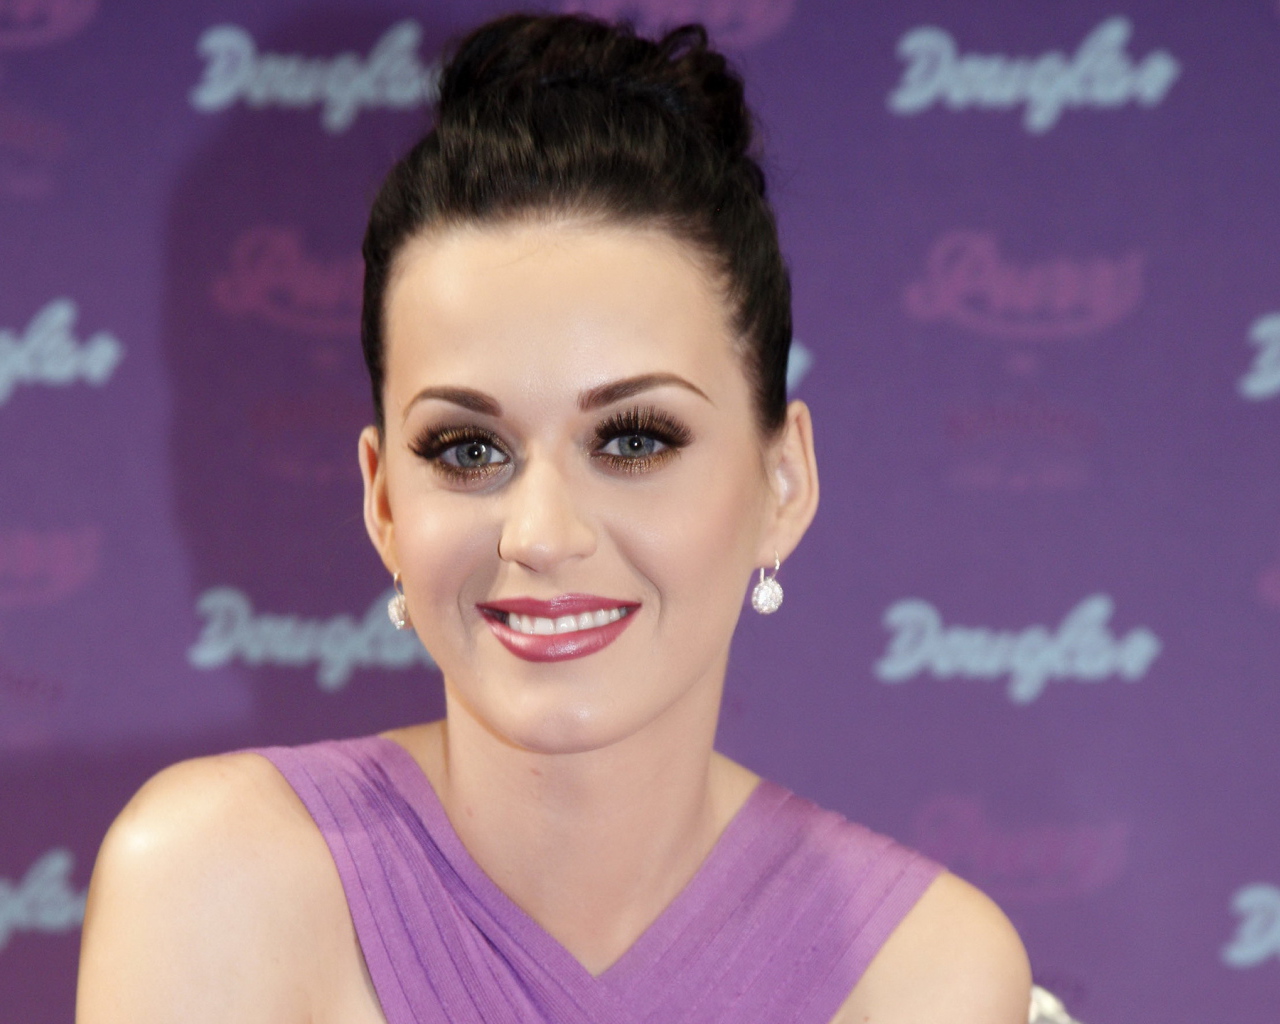 Singer Katy Perry at the press conference